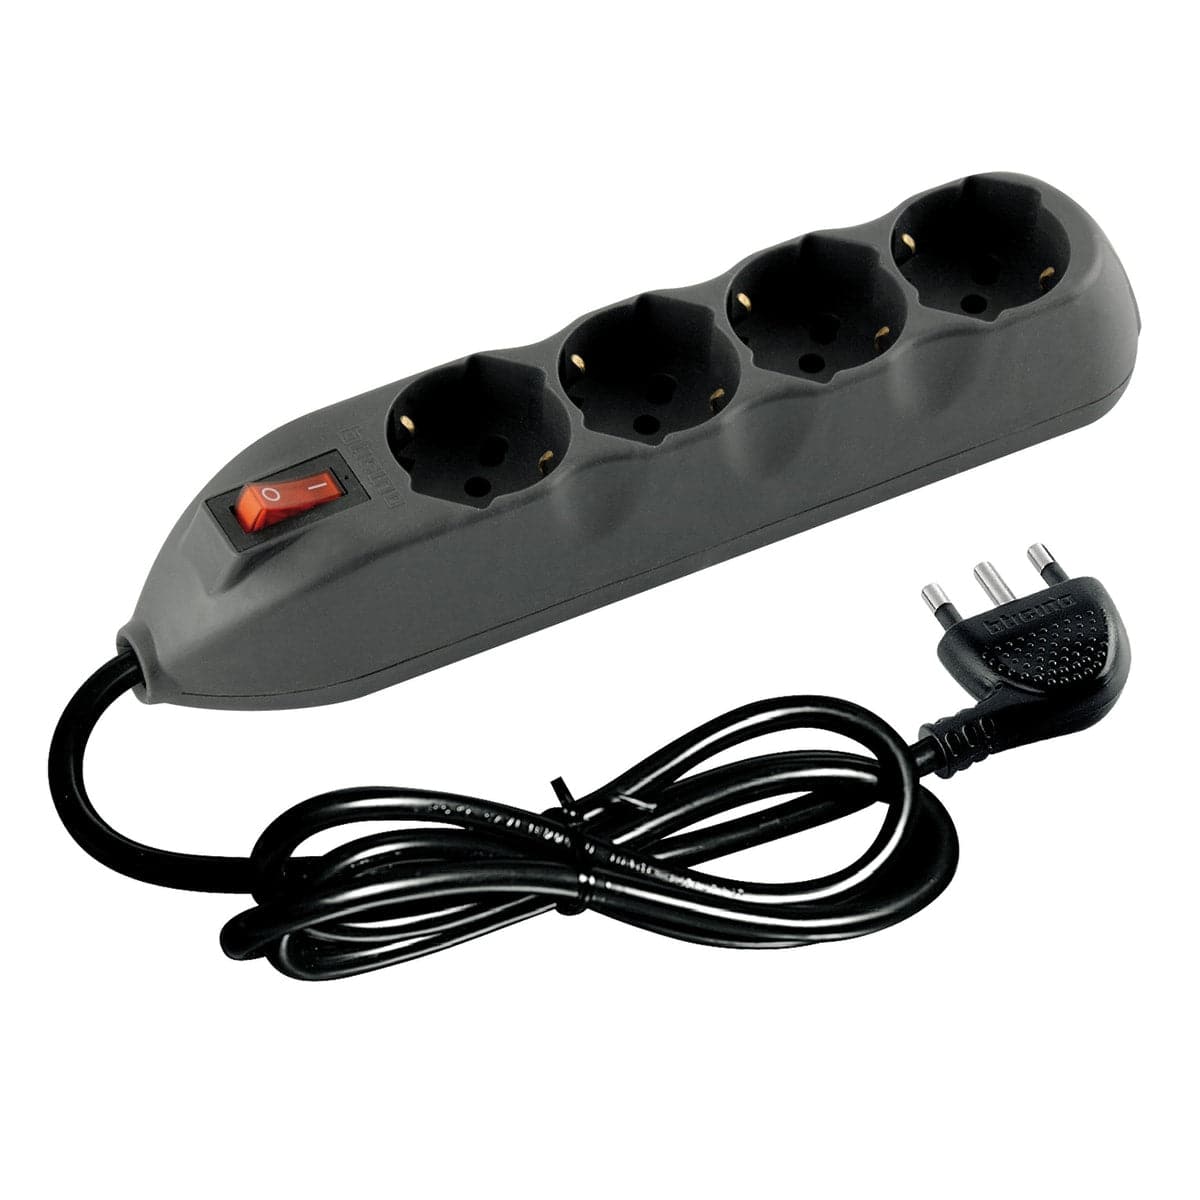 MULTIPRESA POKER 4 sockets with cable and safety switch - grey